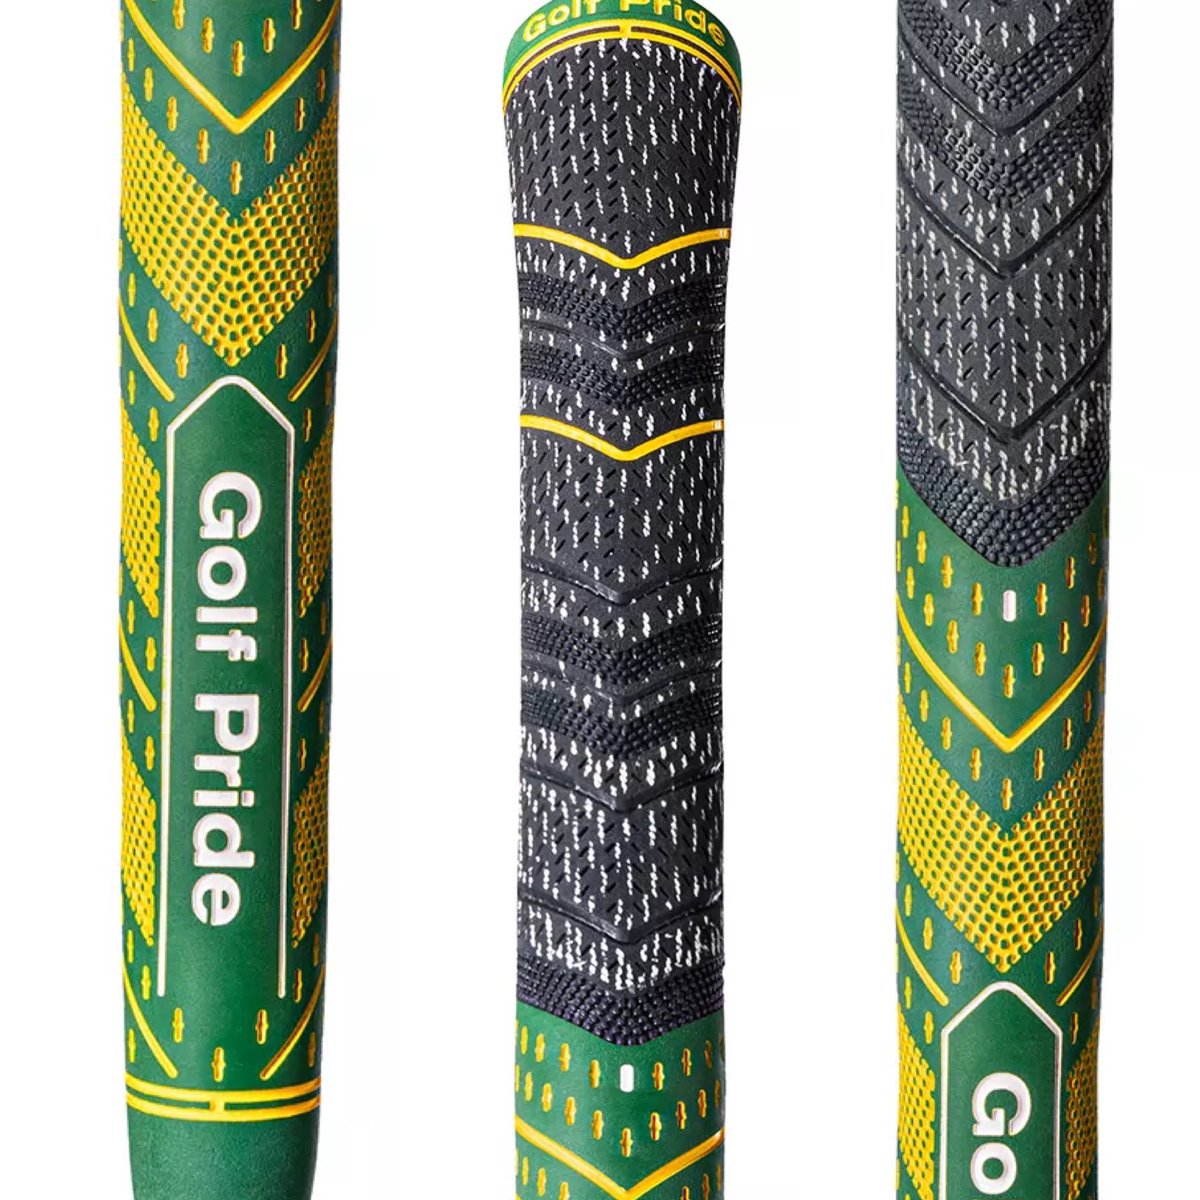 🚨 PGAPappas The Masters Golf Pride Grips GIVEAWAY 2 🚨 🔥 2024 Honorary Starter Golf Pride Grips Set of 3 (you choose standard or midsize) 👀 #TheMasters To enter: 🌺 Repost 🌺 Follow @PGAPappas and @golfpridegrips